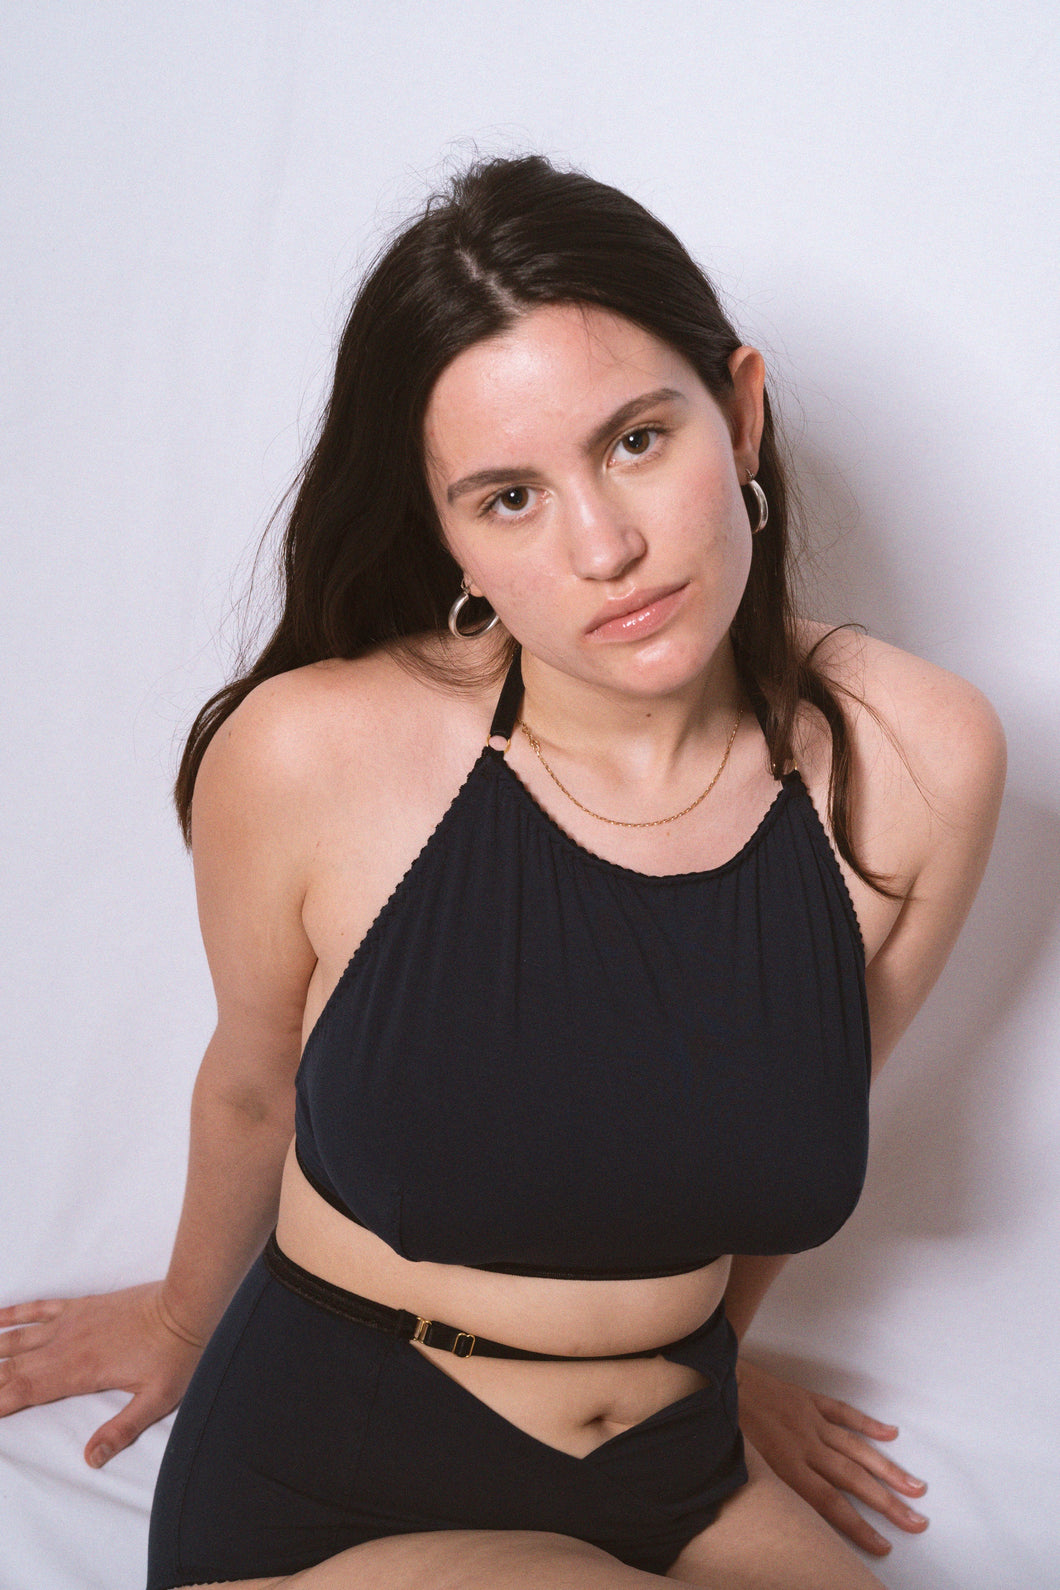 A woman looking up at the camera, she has long brown hair and gold hoop earrings. She wears the Artemis high neck halter bralette and high waist knickers in petrol blue bamboo jersey. The bralette comes up to just below her collar bones and has a scoop neck. The elastics on the bralette are black with gold hardware.